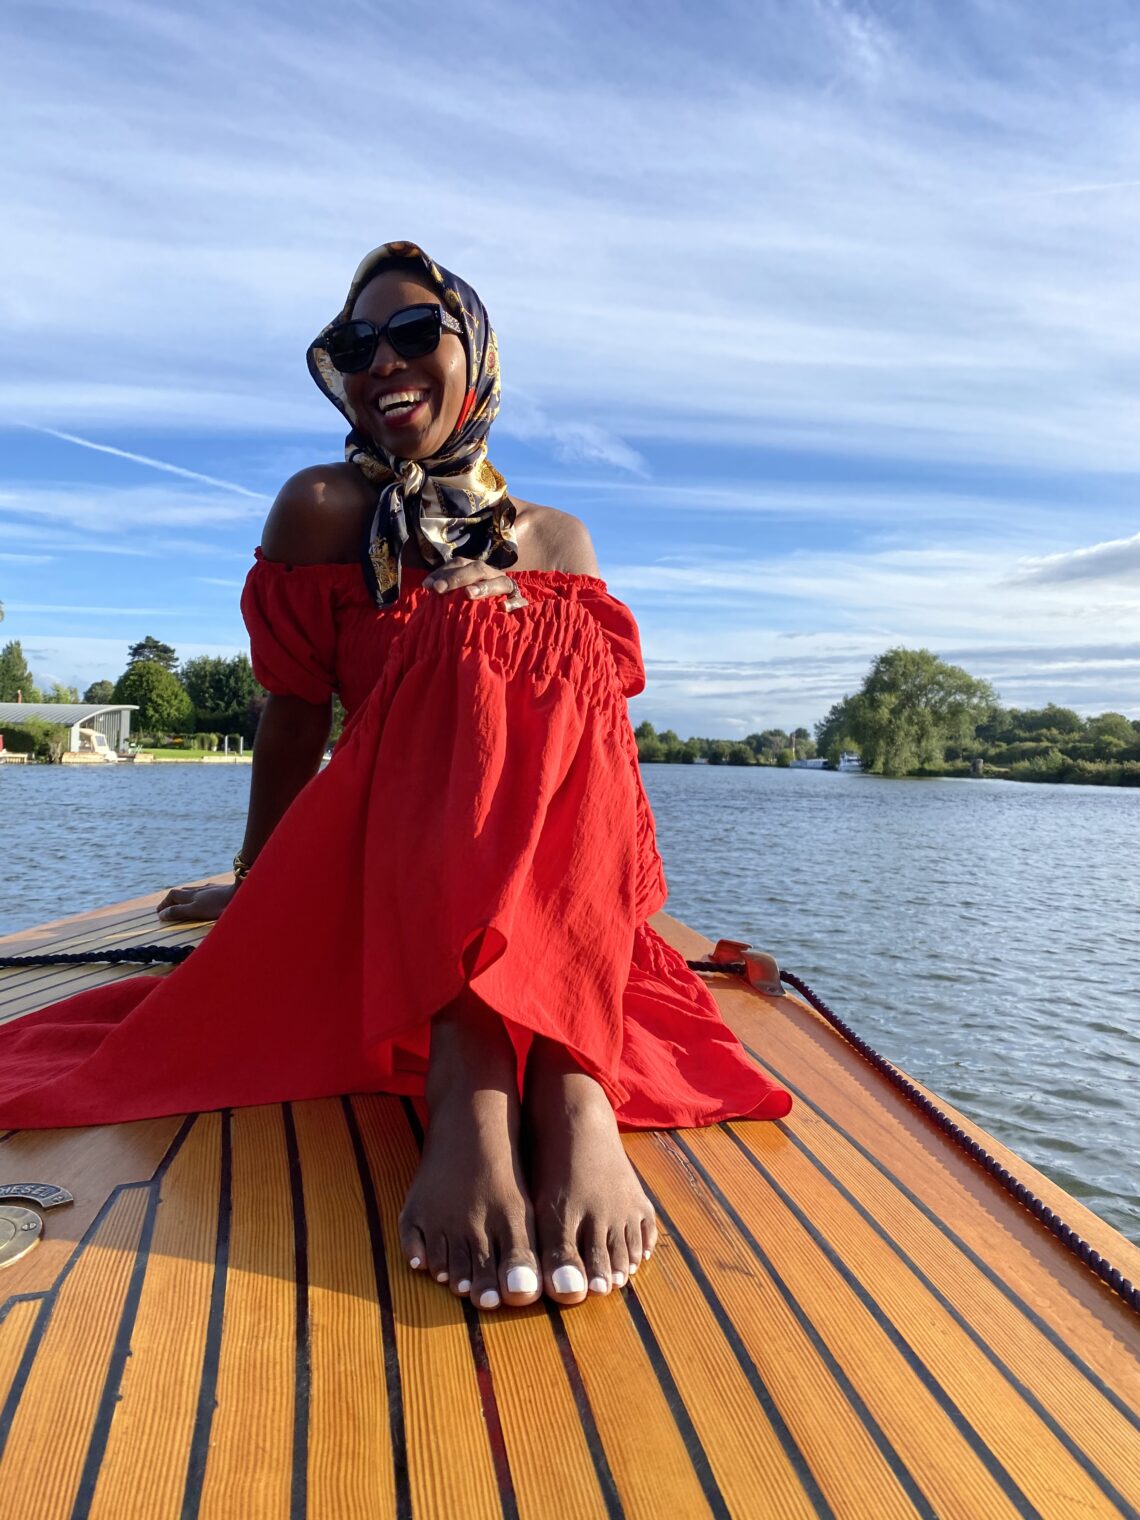 cliveden house - boat day - the Suzy Ann - lifewithbugo